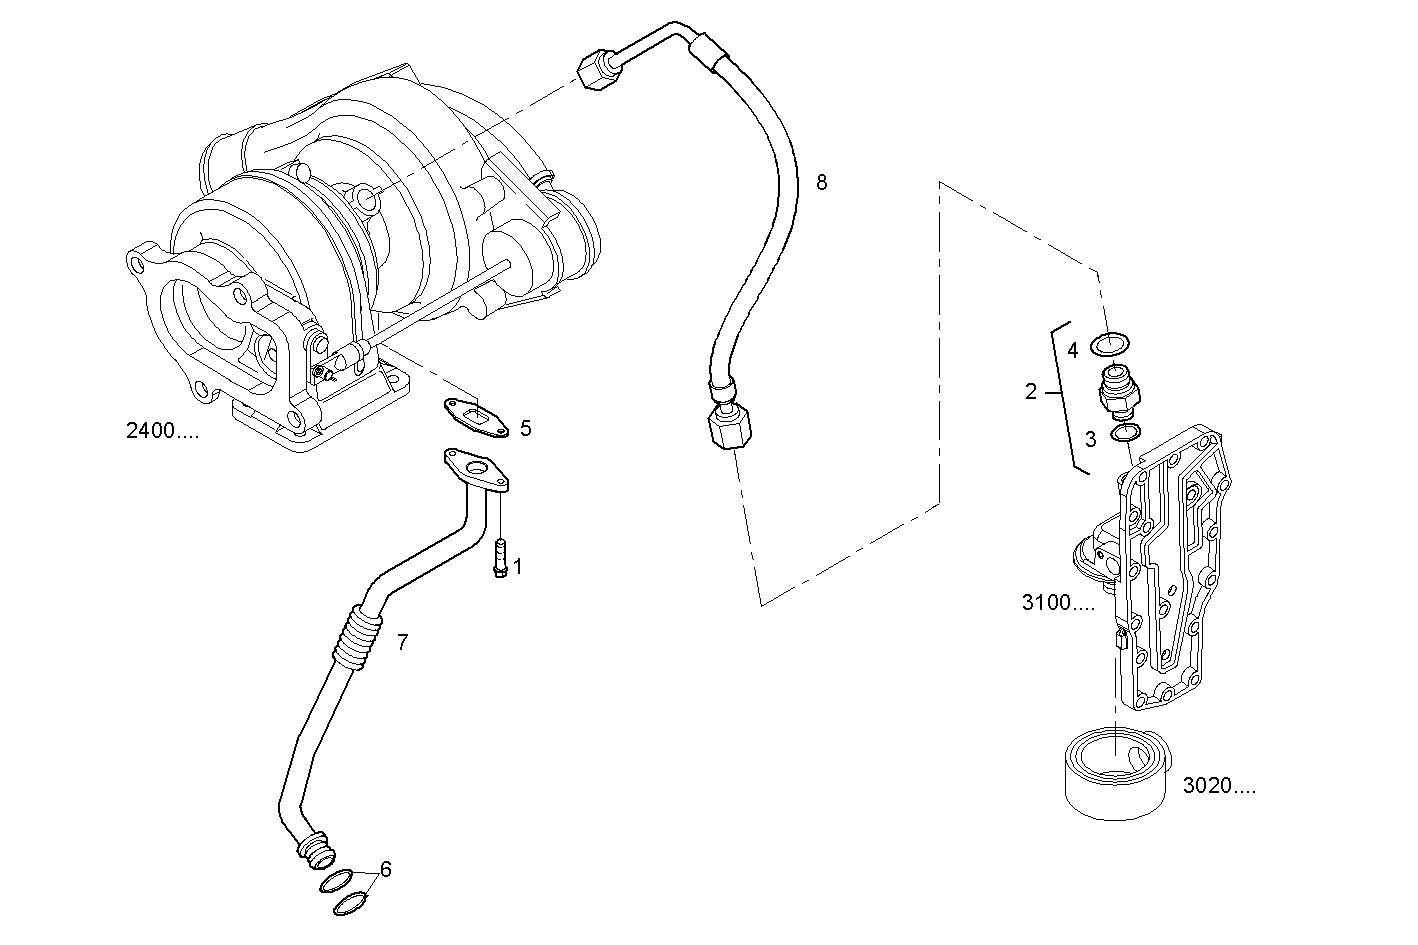 TURBOCHARGER OIL LINES